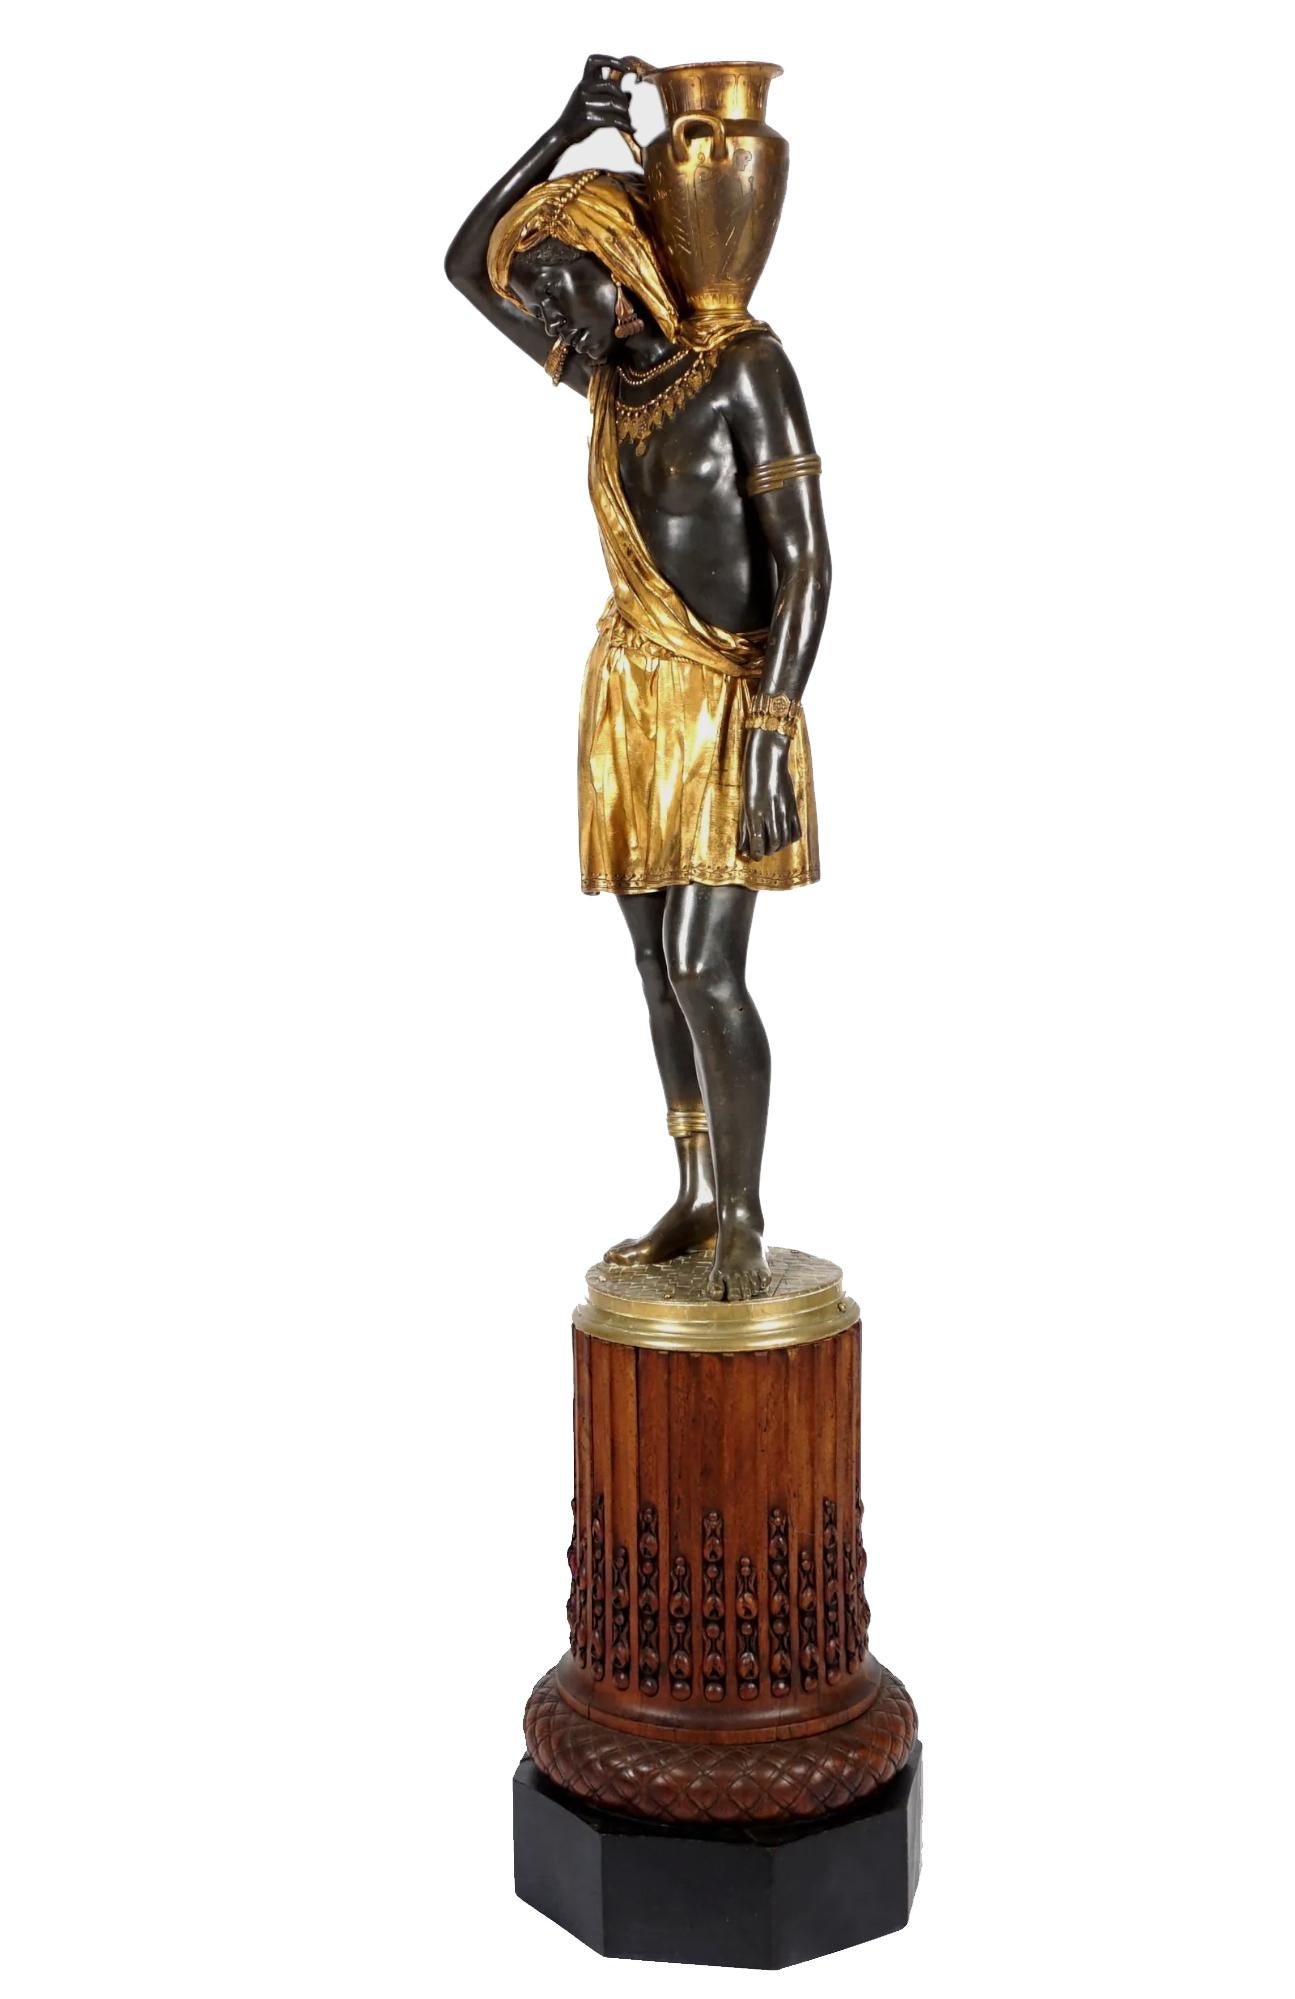 Parcel gilt and patinated bronze figural statue of a Nubian Water carrier with a pitcher on her shoulder. The contrast between the deep bronze and bright gilding is incredibly striking. The woman drips in gold jewelry and drapery, wearing arm